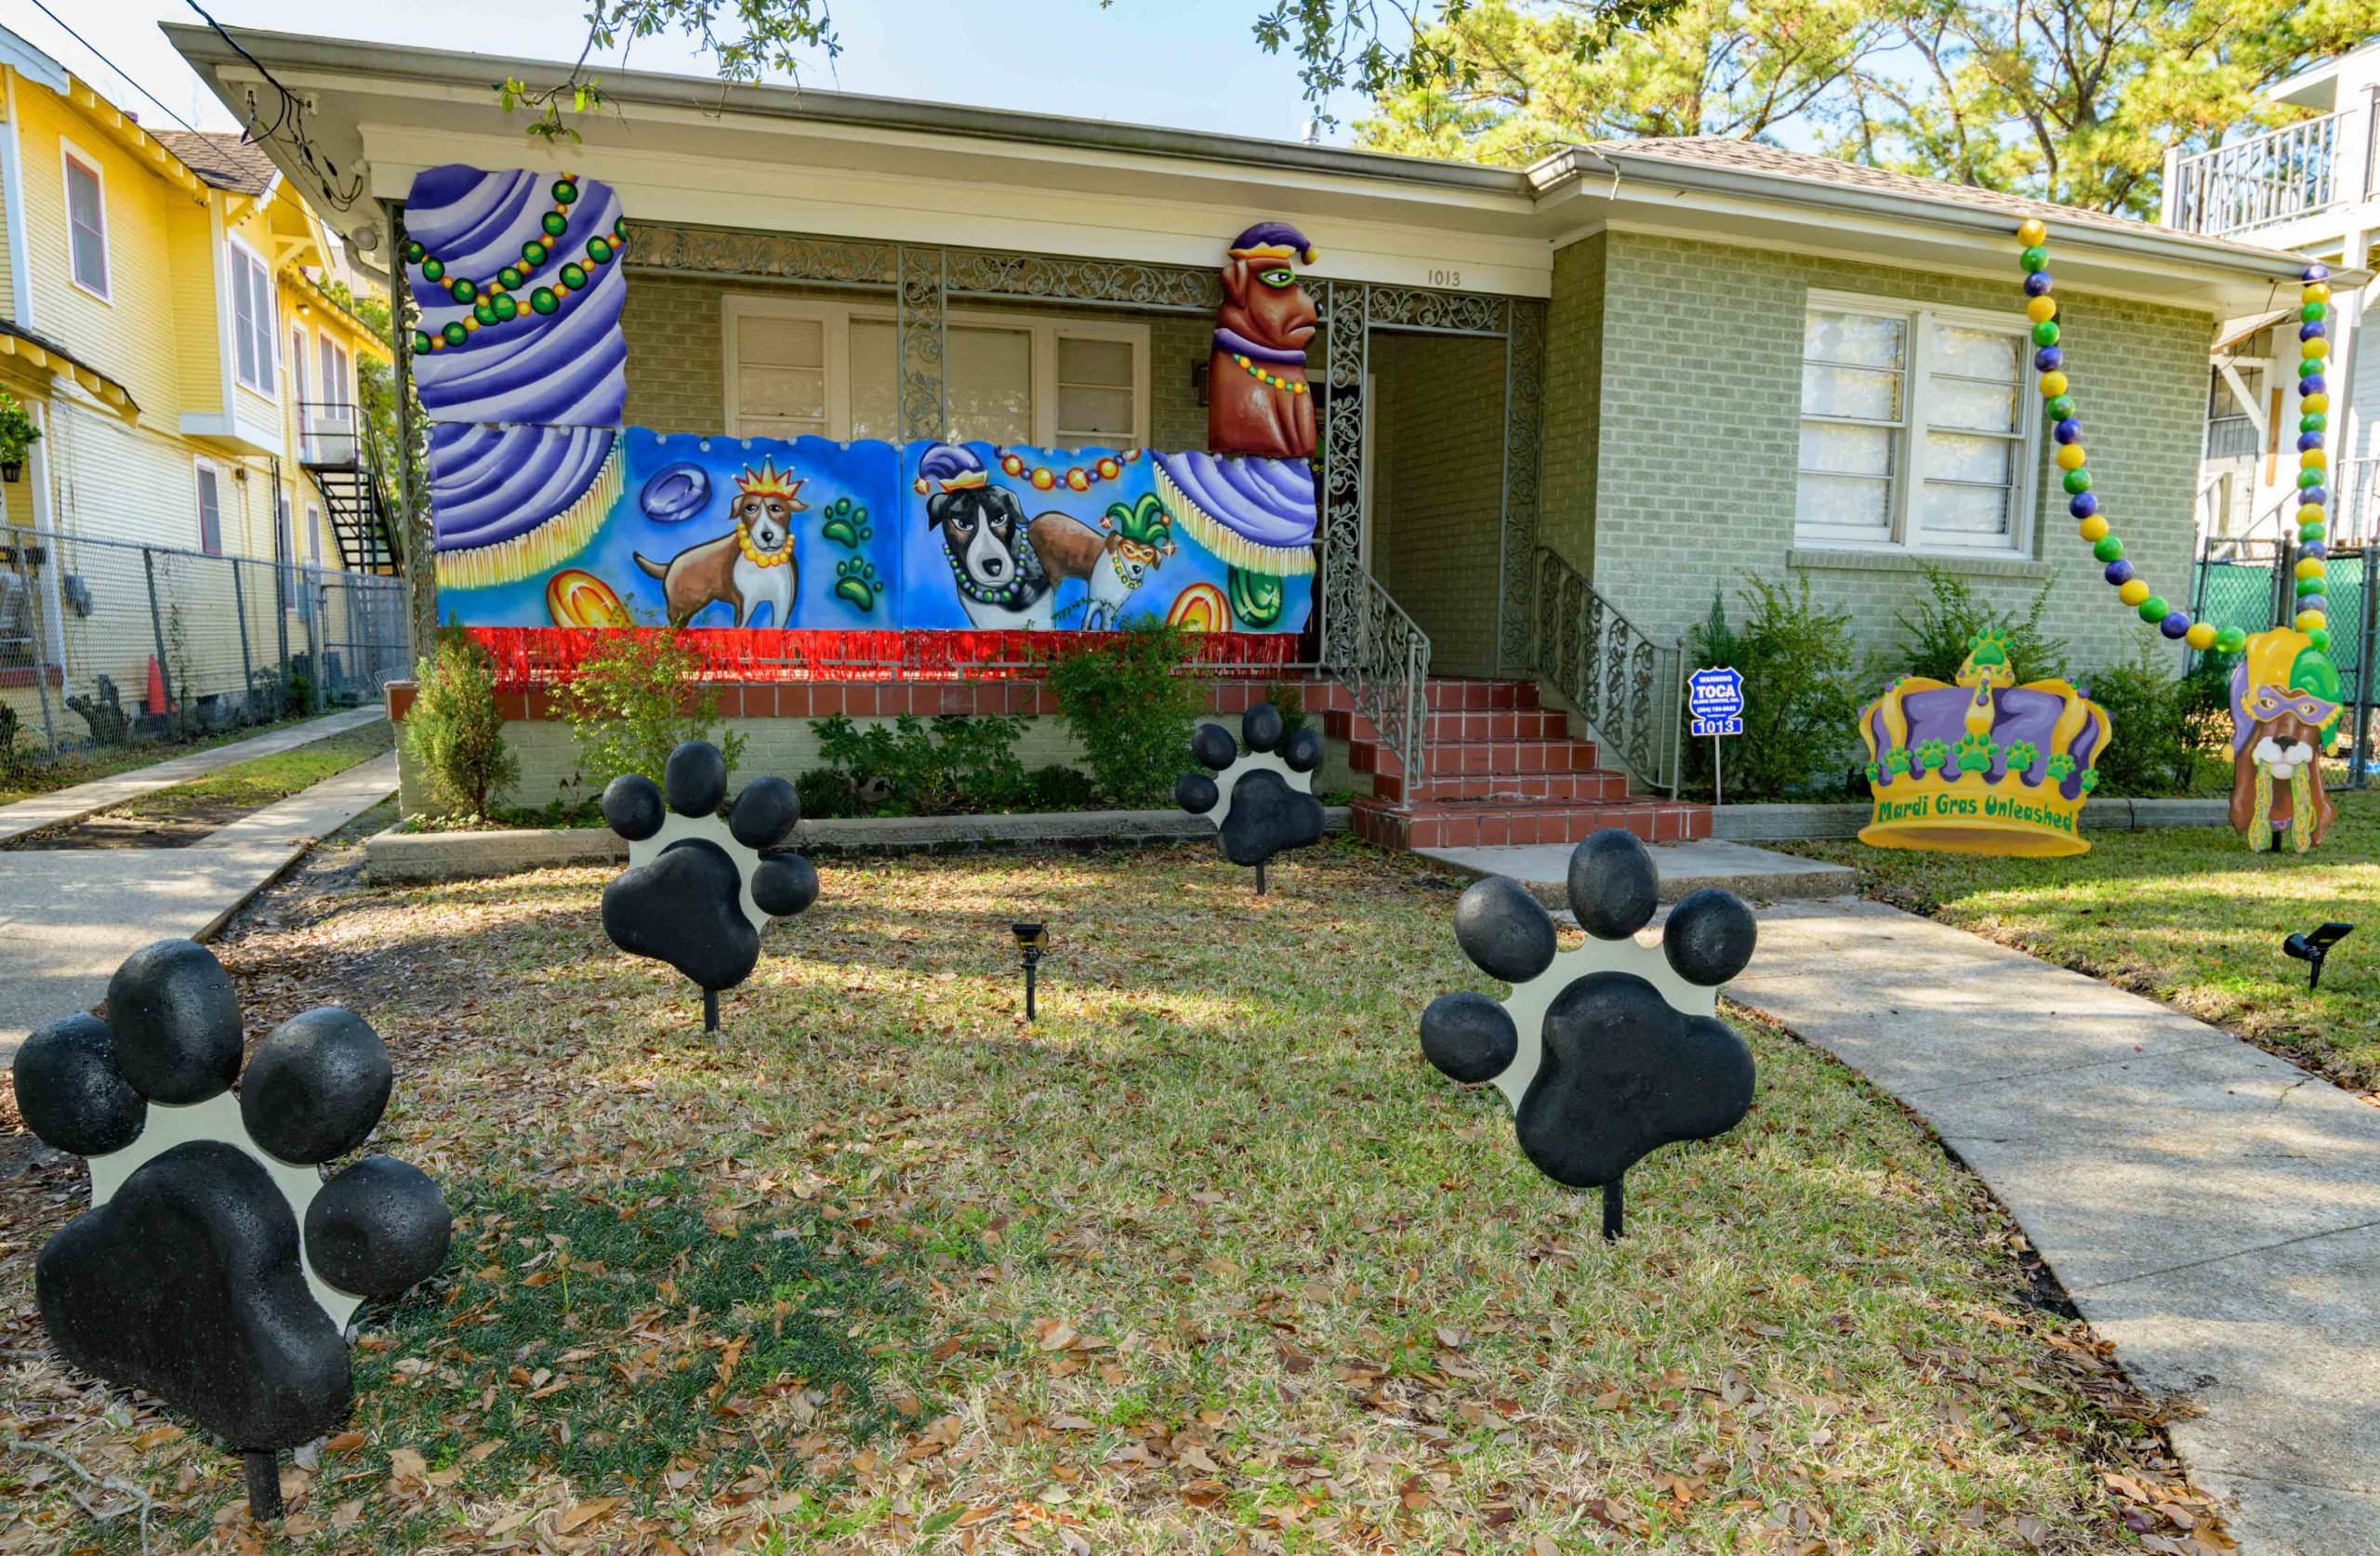 These puppies are free to a good home in front of a City Park neighborhood house decorated with the theme ÒMardi Gras Unleashed.Ó The home features a #PorchFloat created by Crescent City Artists, LLC. #CrescentCityArtists states that they are the first Black-owned Mardi Gras float service providers in Louisiana and are led by a New Orleans husband and wife duo ReneÊand InezÊPierre. The group has created several porch floats to fit on balconies and porches for the Krewe of House Floats, an initiative to decorate homes during the Carnival season because of the cancellation and postponement of parades and gatherings for #MardiGras2021 due to COVID-19 pandemic. Photos by @MattHintonPhoto for @VeryLocalNOLA
@rene.pierre.315213Ê#neworleansÊ#louisianaÊ#mardigrasÊ#nolaÊ#504 #blackownedbusiness #vlnolamardigras #Carnival #neworleanslouisiana #nolalife #herenowlouisiana #gonola #onetimeinnola #itsyournola #showmeyournola #nola #followyournola #exploreneworleans #ilovenola #VLNOLA #kreweofhousefloatsÊ#mardigras2021 @kreweofhousefloats #MardiGrasUnleashed #MardiGrasthrows #puppies #MardiGrasbeads #housefloat